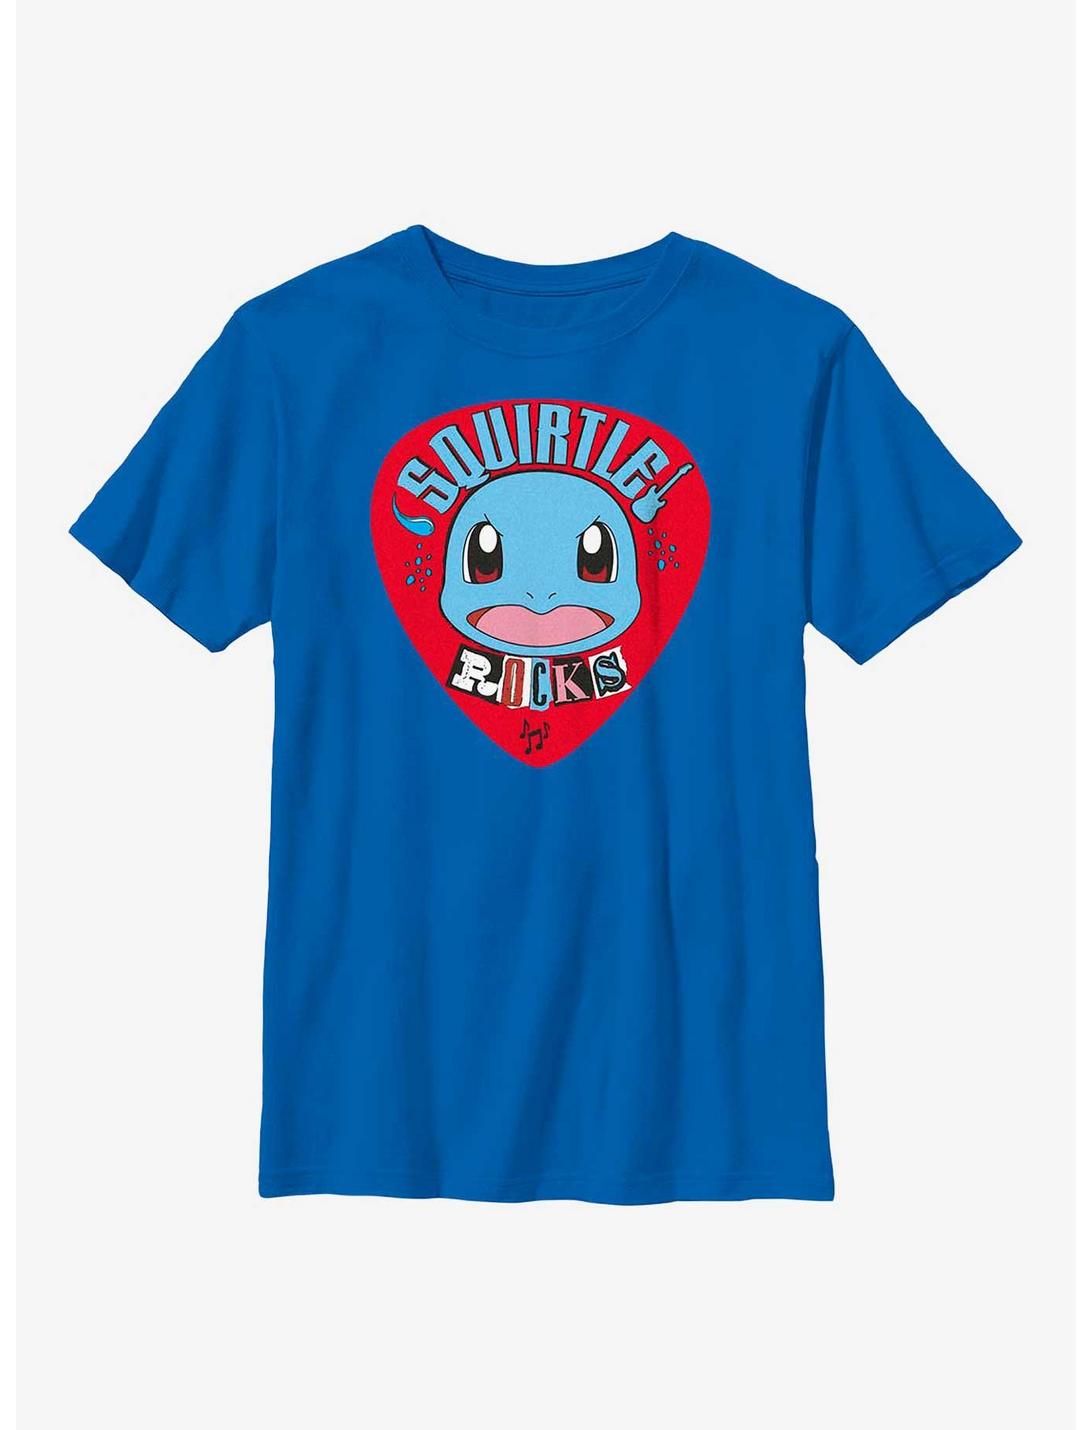 Pokemon Squirtle Rocks Youth T-Shirt, ROYAL, hi-res